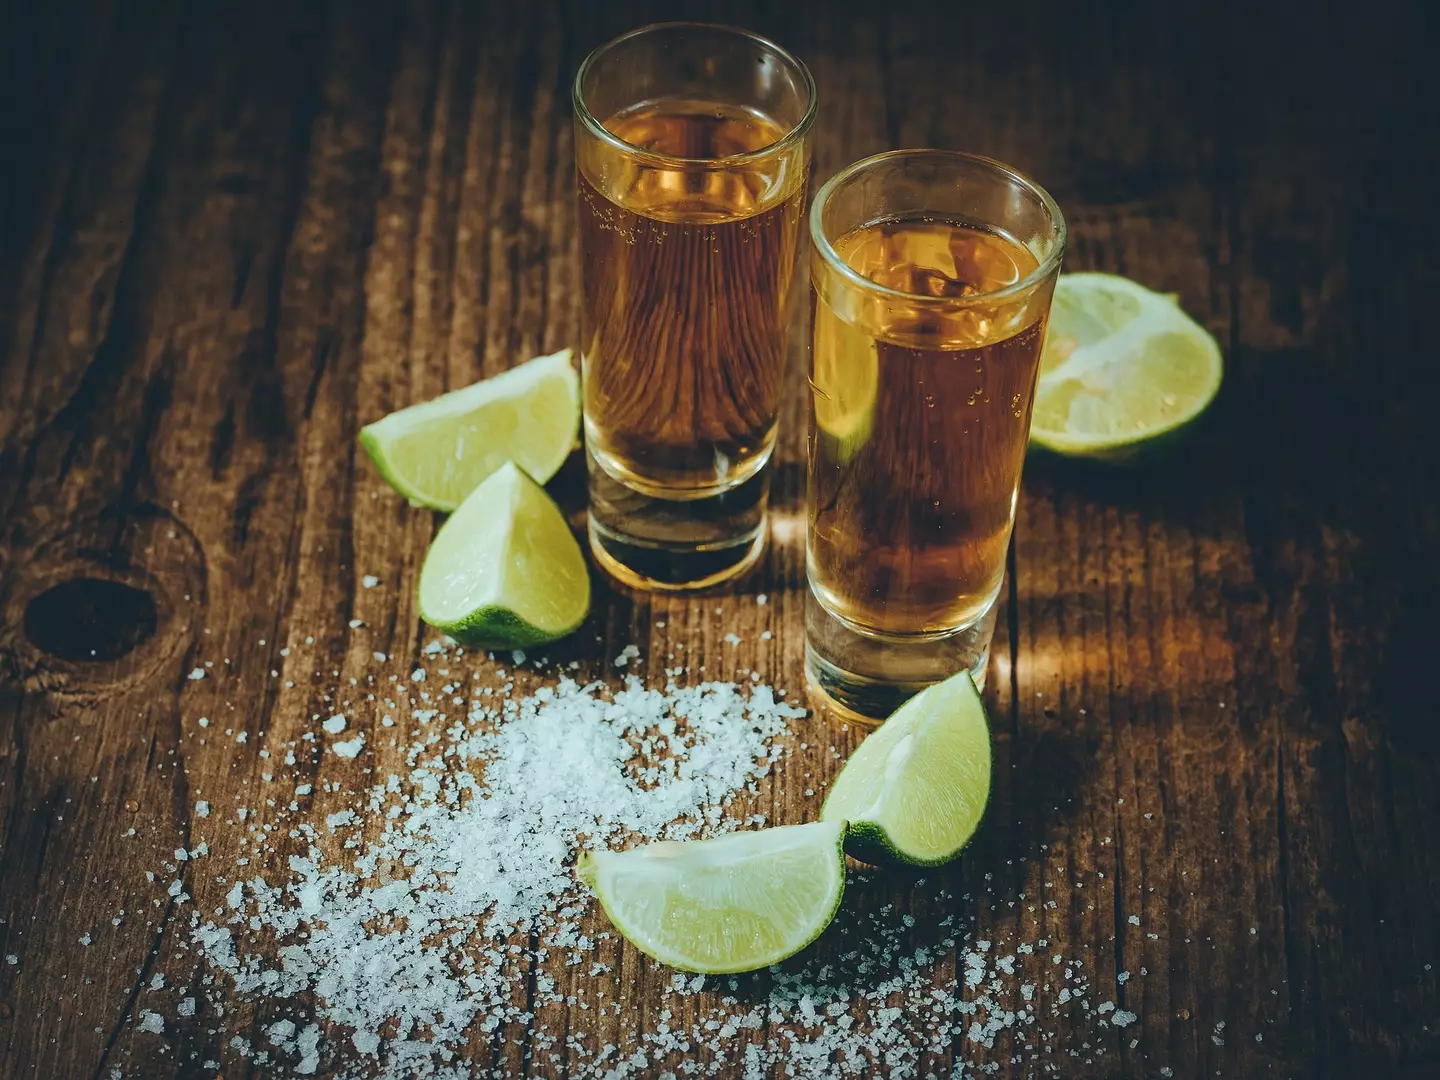 Tequila is one of the more popular choices of shot, usually accompanied by salt and lime.